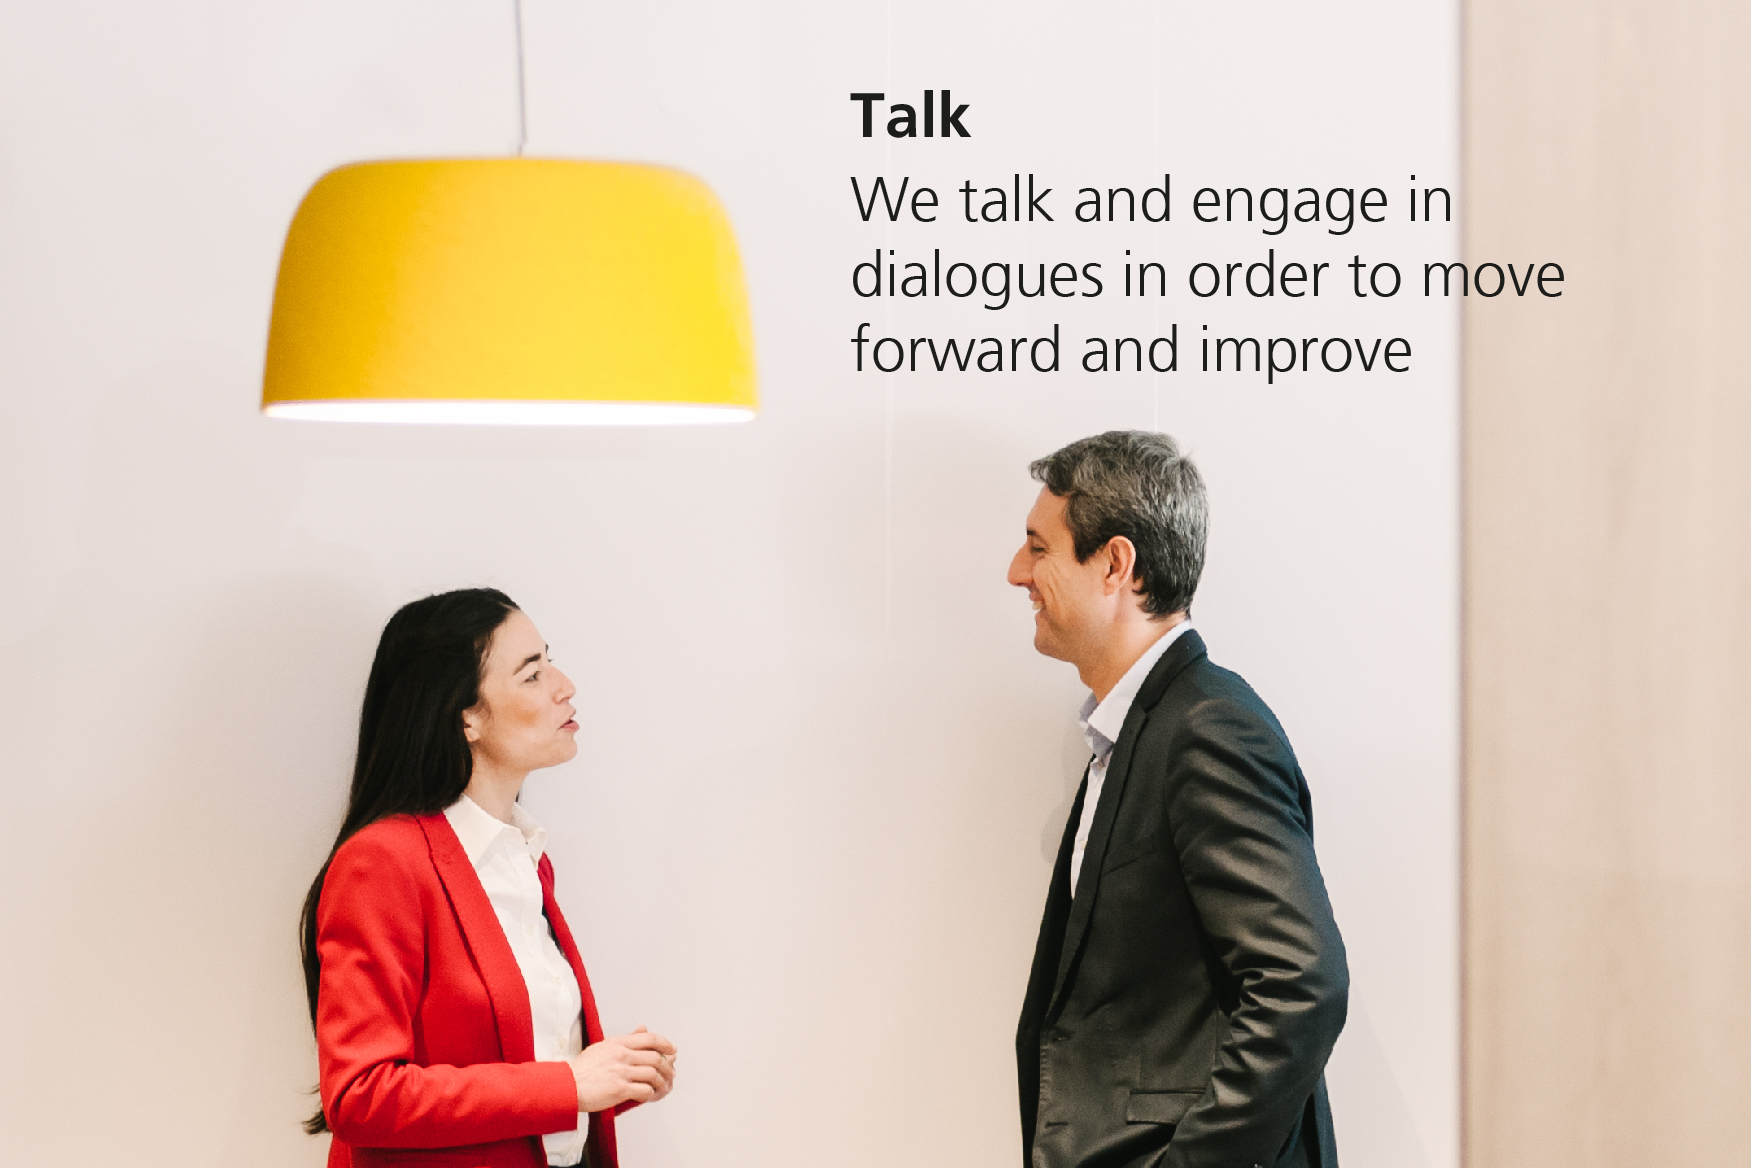 Talk. We talk and engage in dialogues in order to move forward and improve